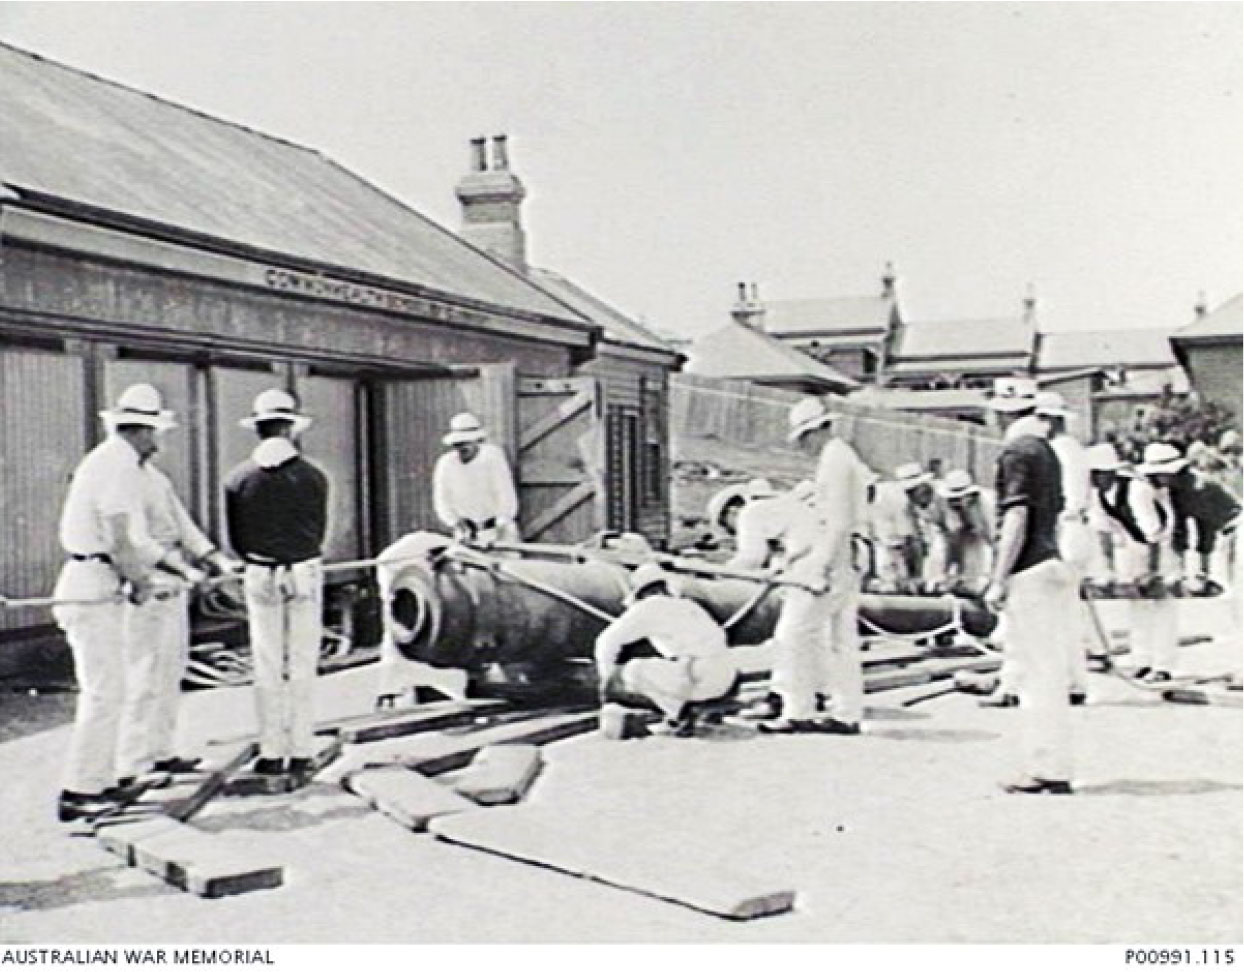 1910. Members of the Short Course (1910-04-24 TO 1910-07-23) at the South Head Commonwealth School of Gunnery. The men are in the Gun Park making preparations to move a 6 inch, Mark 5 gun barrel. (Donor Royal Australian Artillery Historical Society)